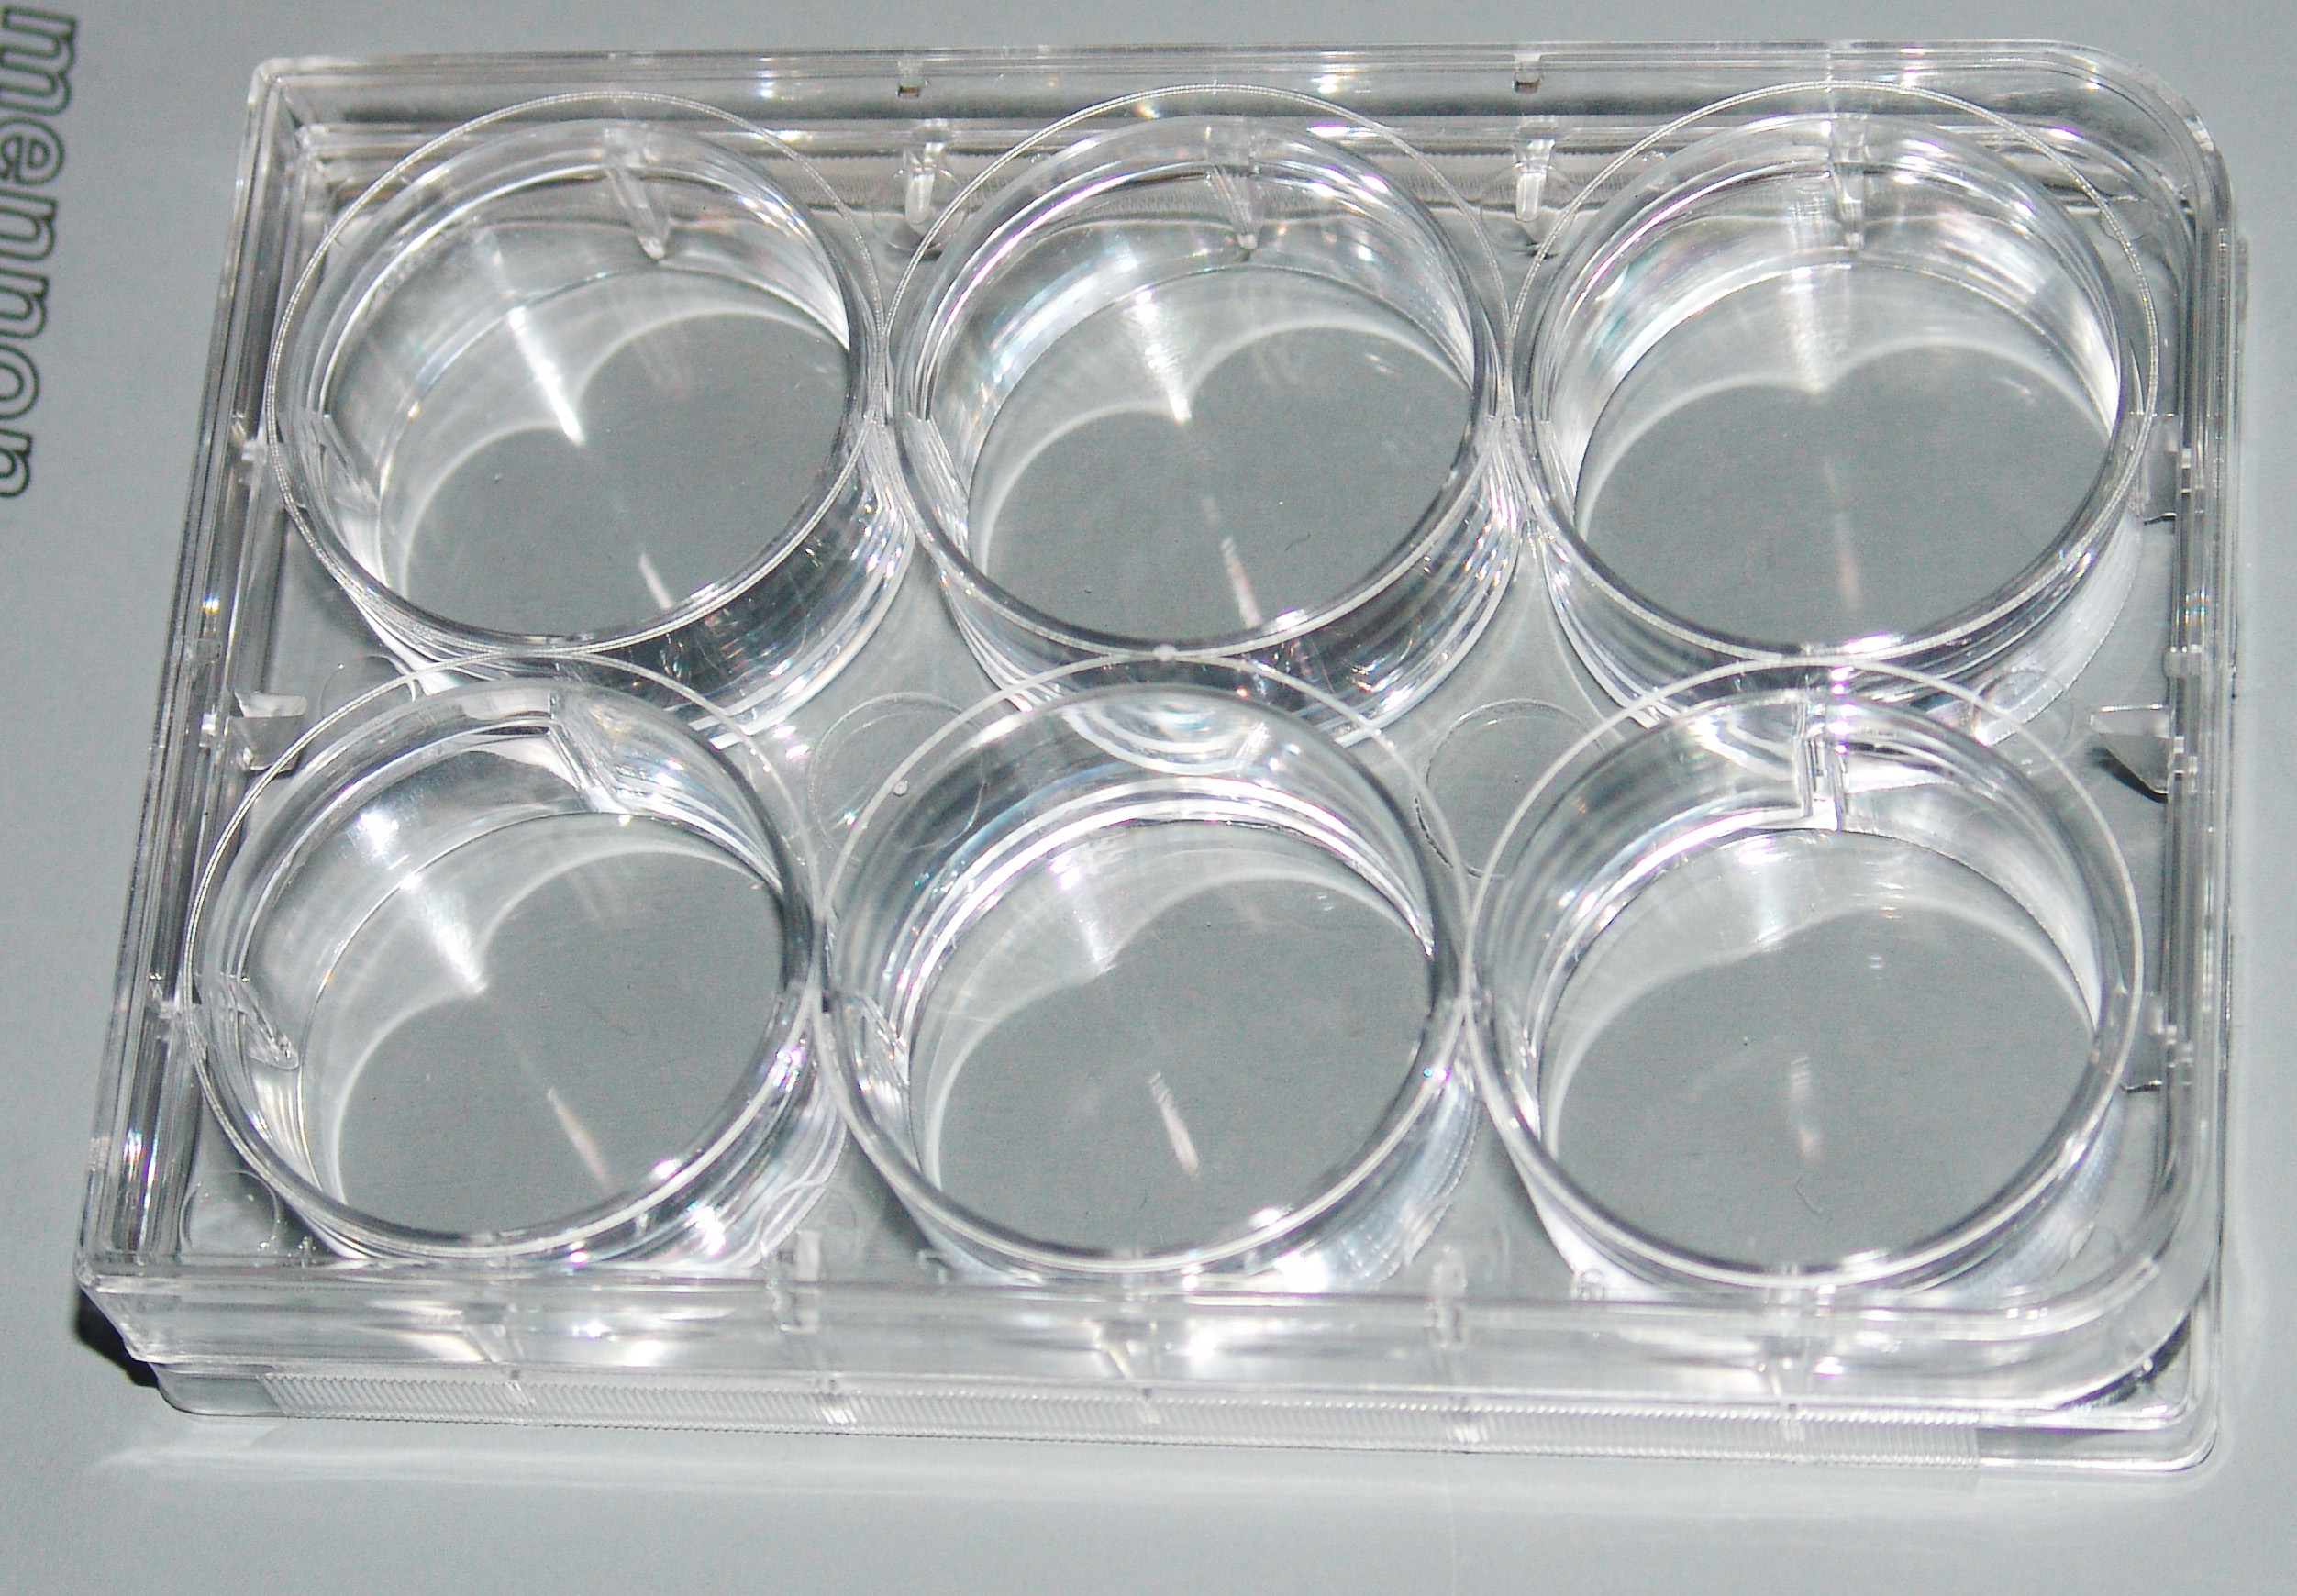 petric dish,treated Plates with ultra-Flat-Bottom wells,petri dish with cells